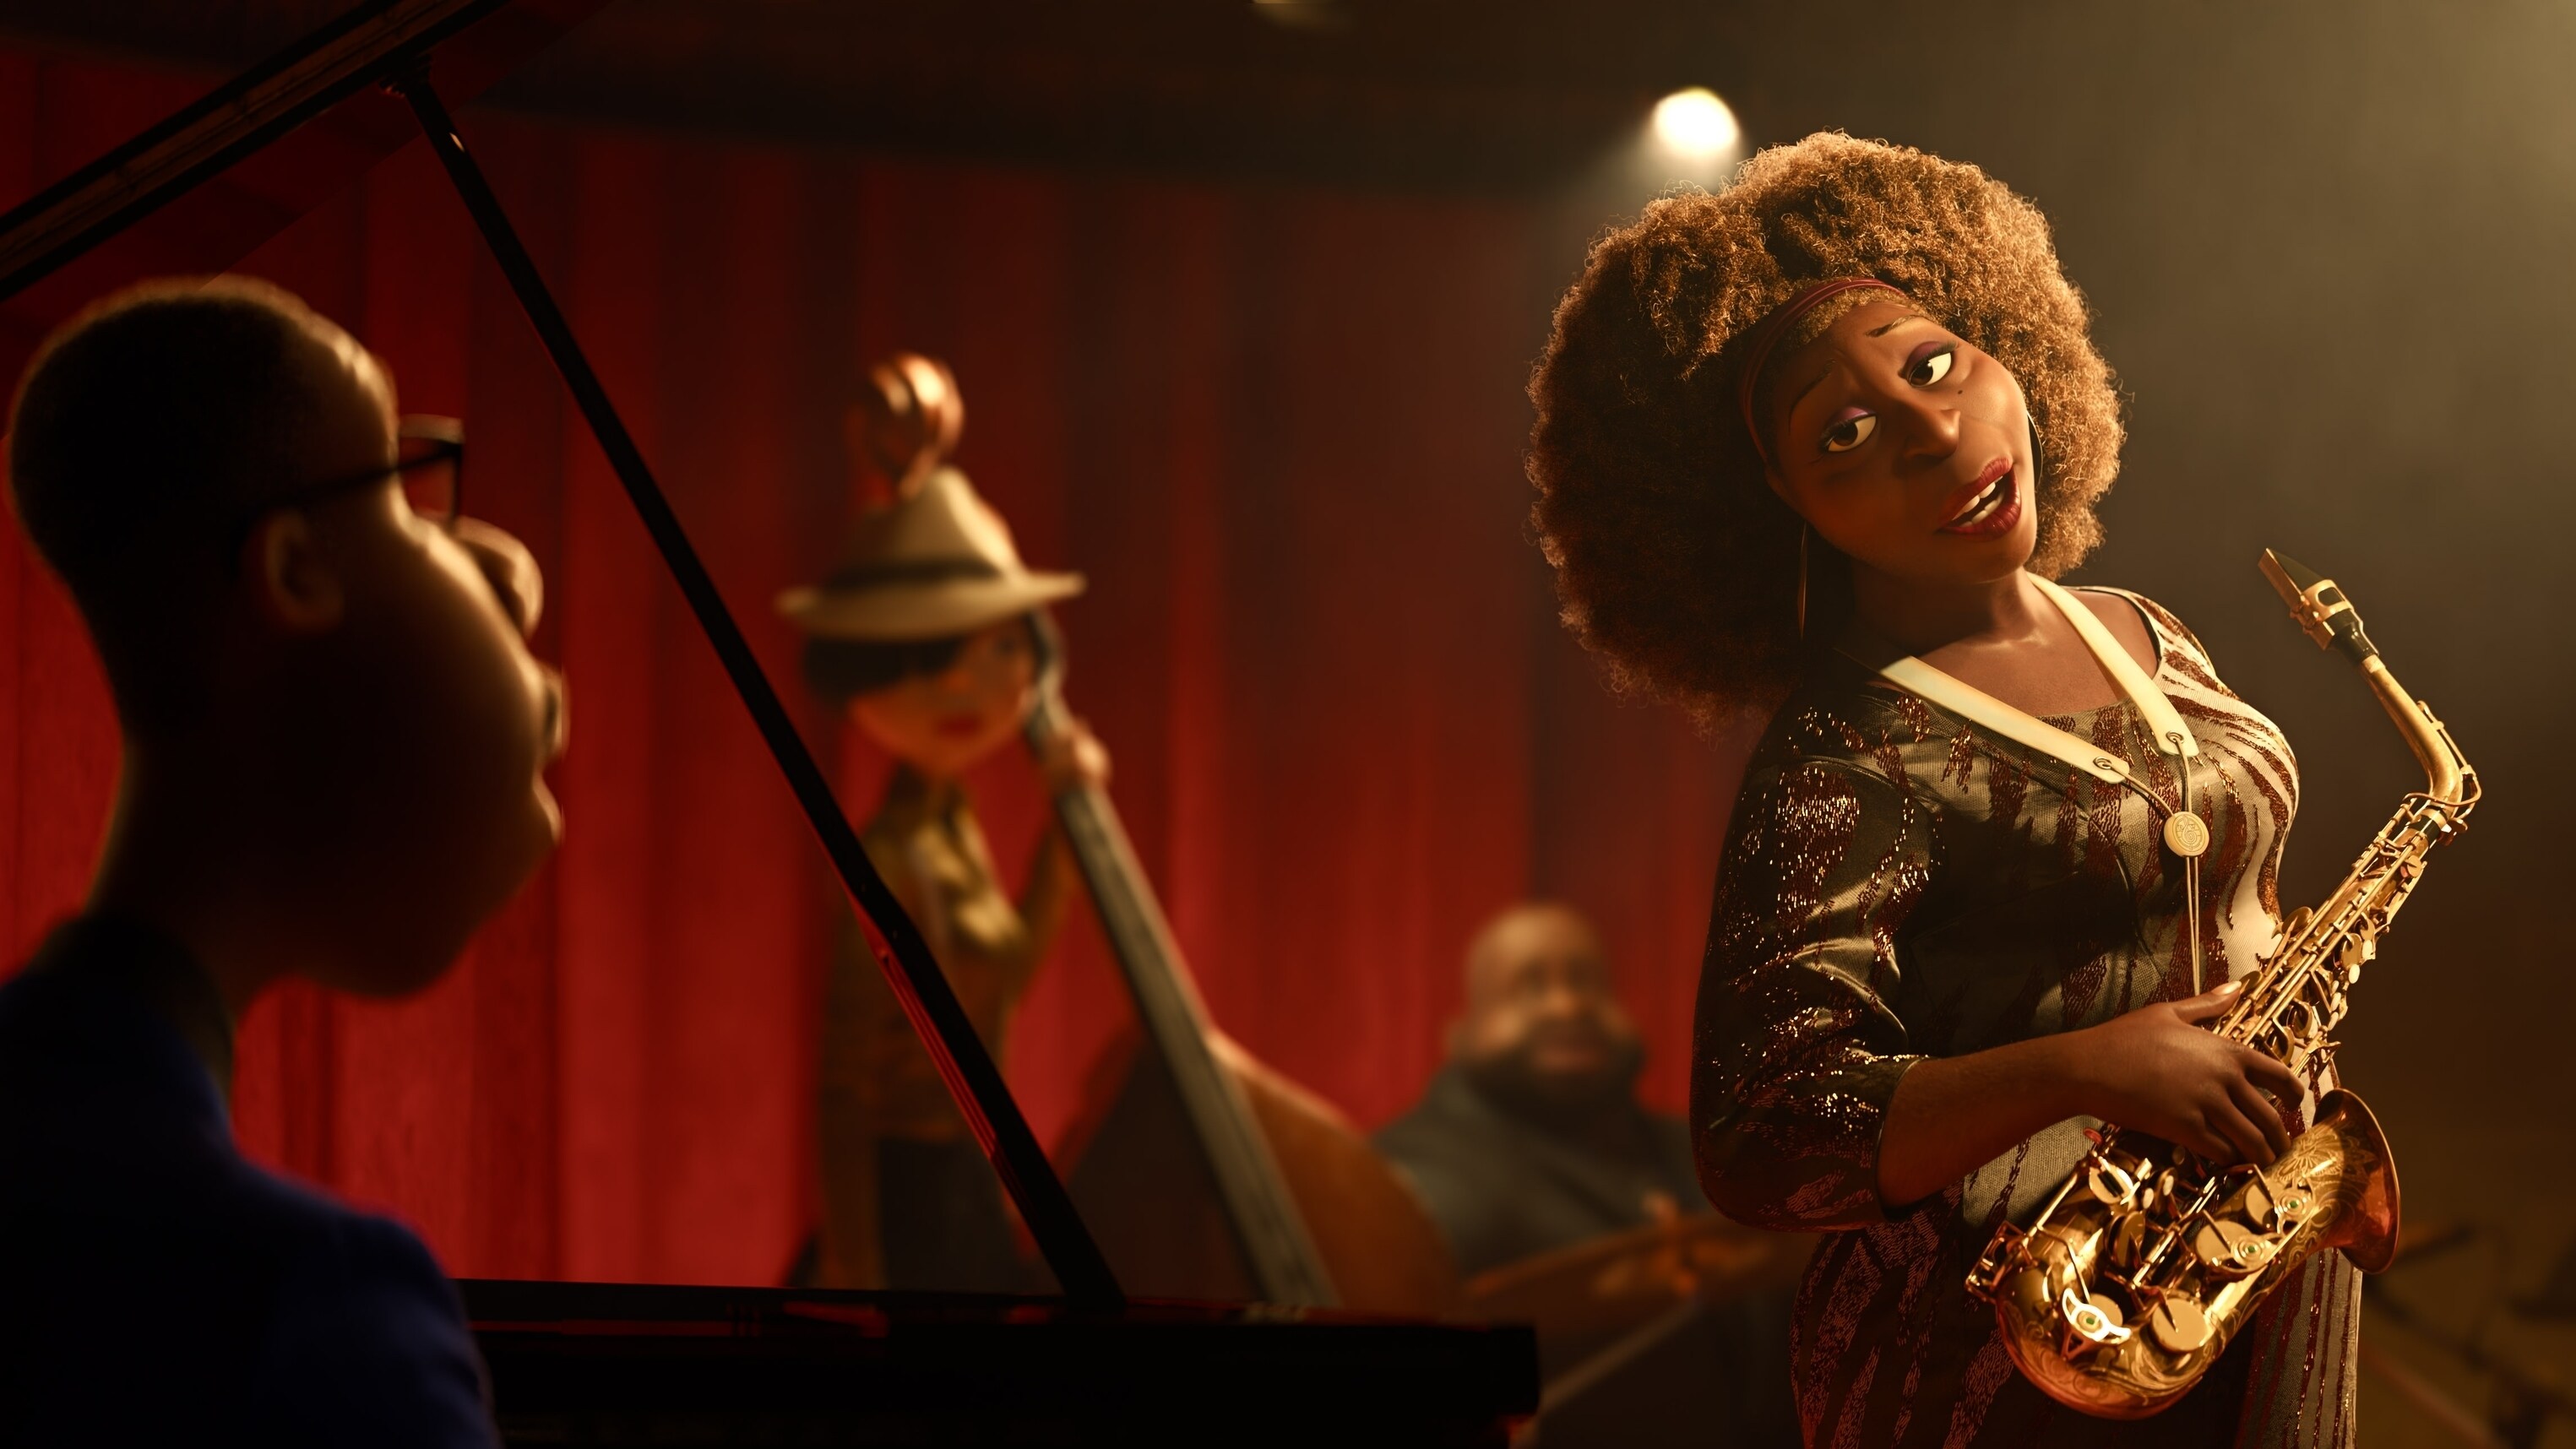 In Disney and Pixar’s “Soul,” a middle-school band teacher named Joe Gardner gets the chance of a lifetime to play the piano in a jazz quartet headed by the great Dorothea Williams. Featuring Jamie Foxx as the voice of Joe Gardner, and Angela Bassett as the voice of Dorothea, “Soul” will debut exclusively on Disney+ (where Disney+ is available) on December 25, 2020. © 2020 Disney/Pixar. All Rights Reserved.